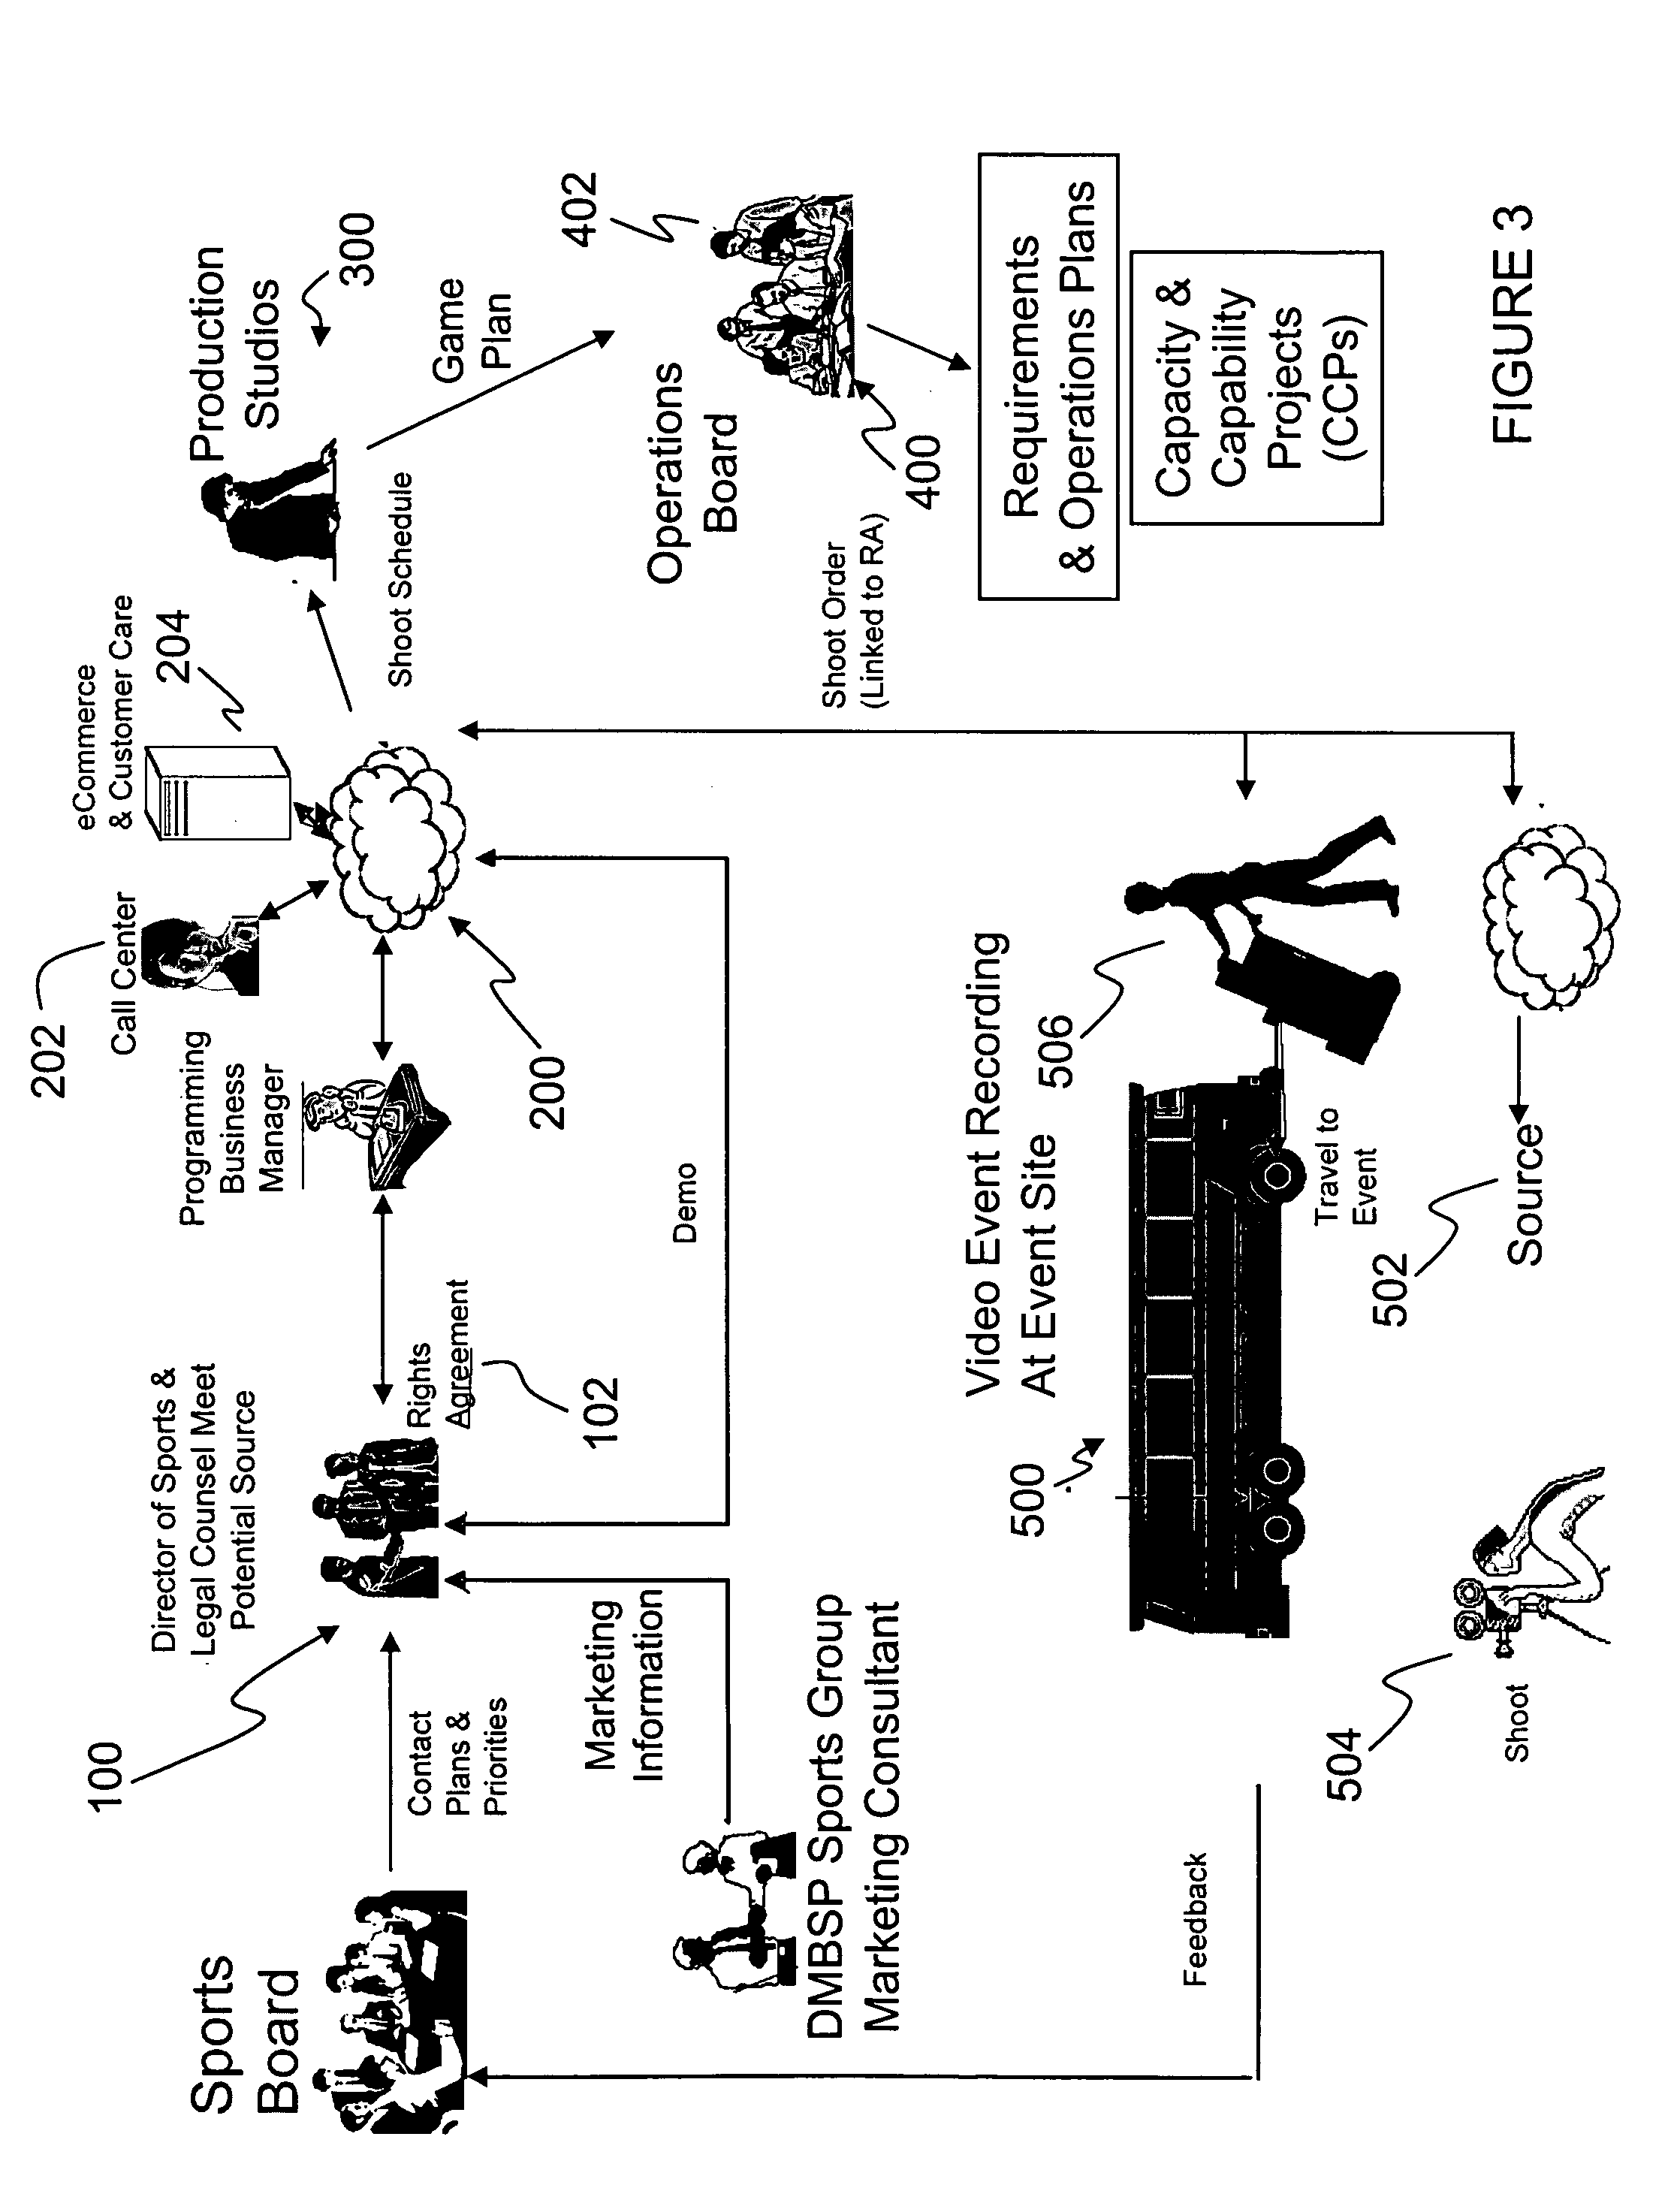 System and method for unlimited channel broadcasting